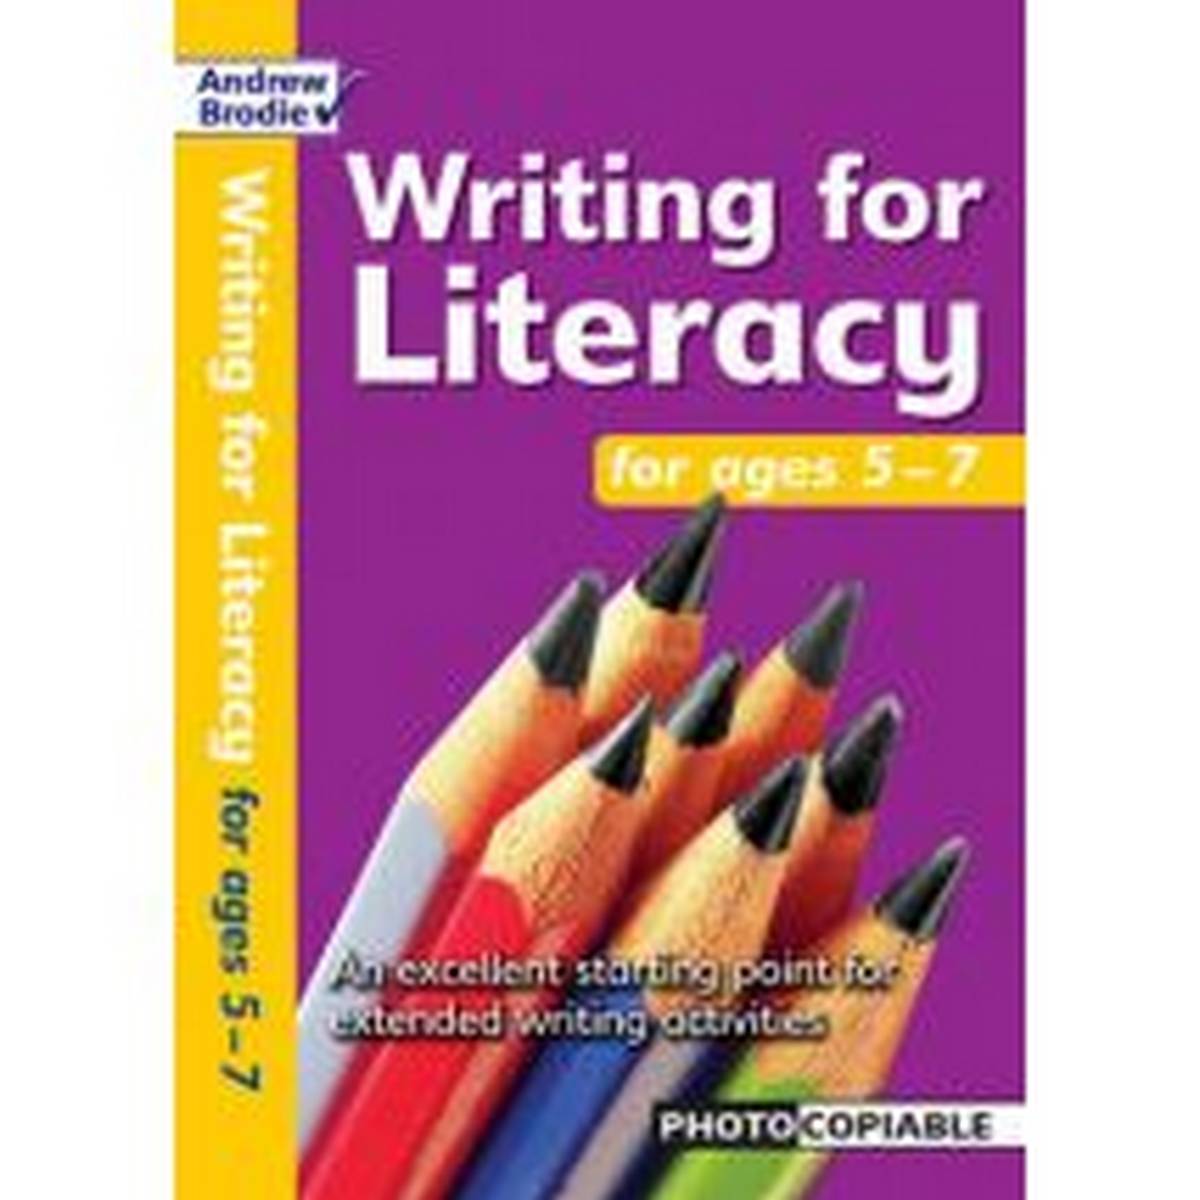 Writing for Literacy for Ages 5-7